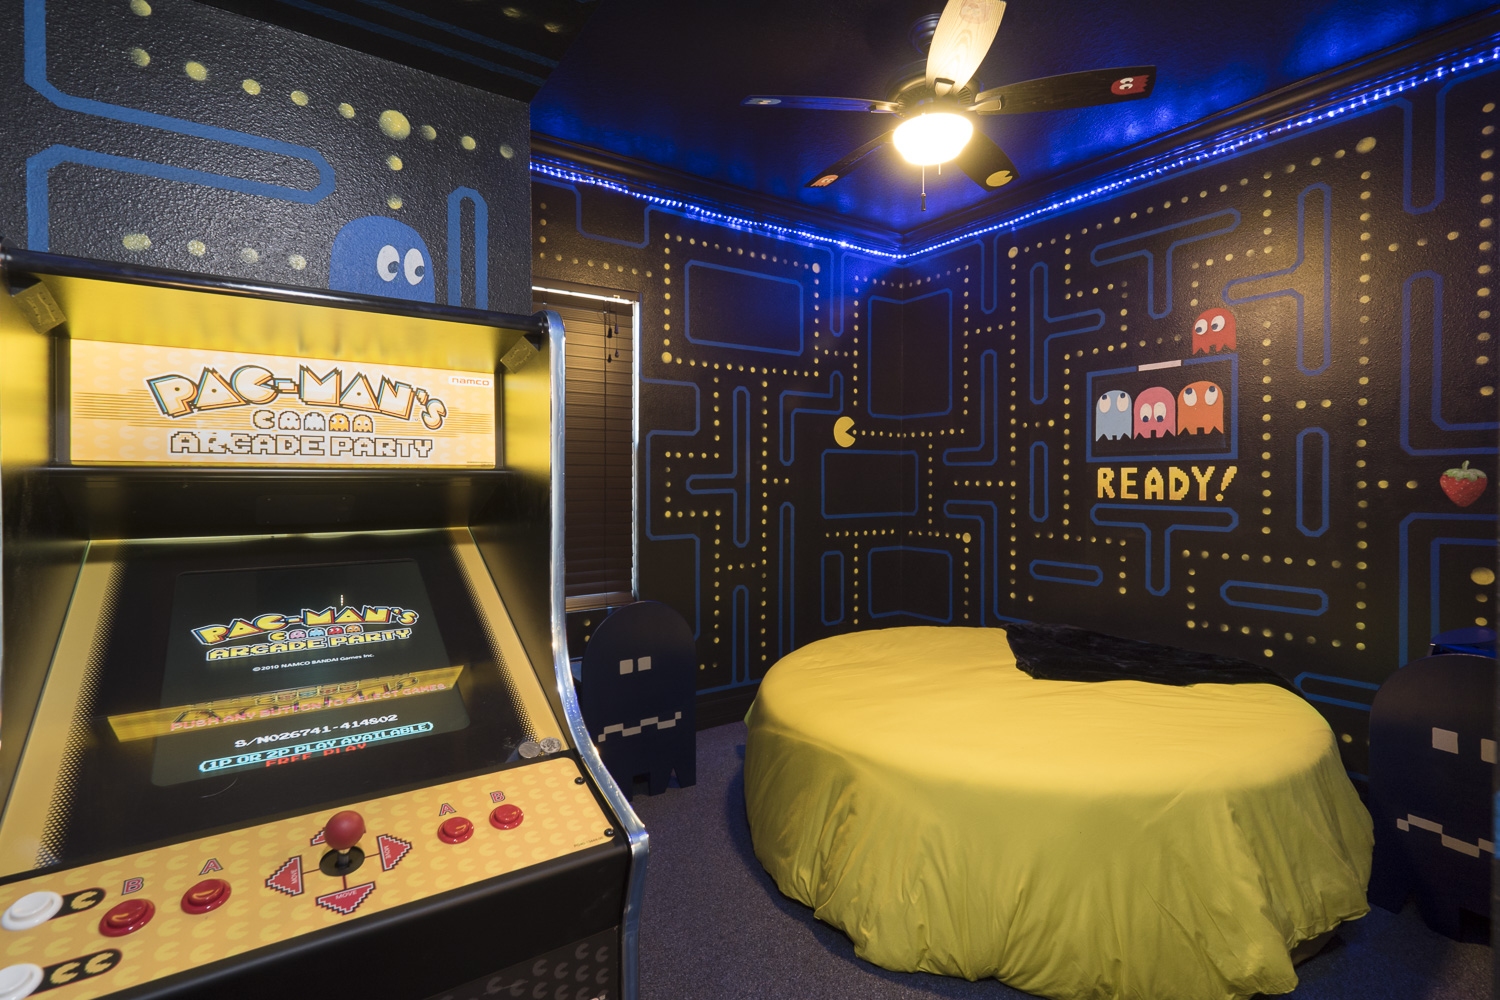 The Pac-Man Bedroom at The Great Escape Lakeside